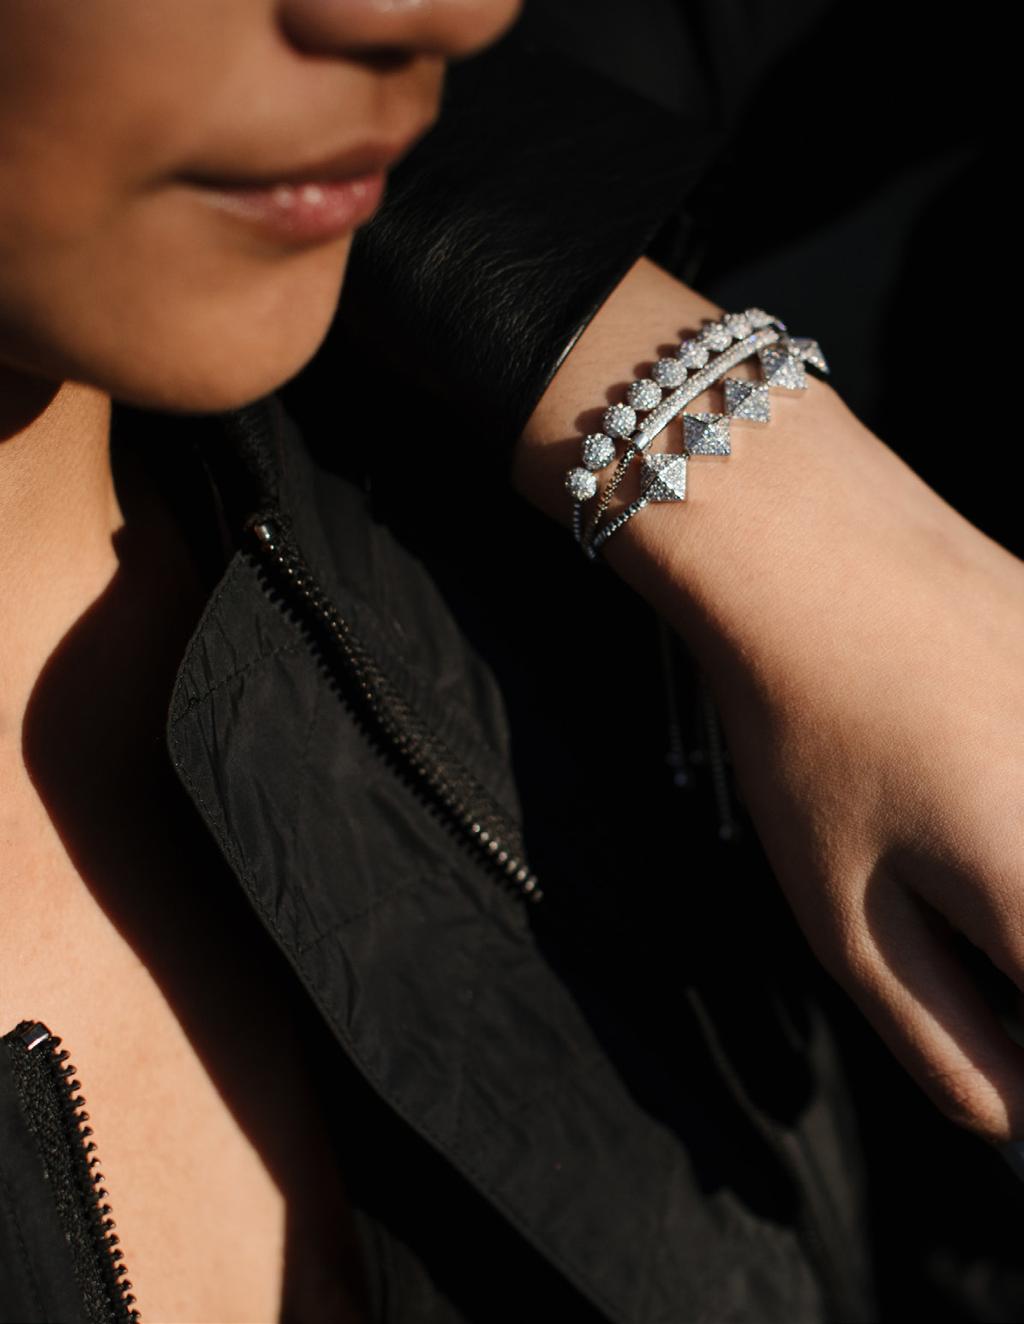 STACK &sparkle Oh-so-giftable bracelets in 3 unique styles with adjustable